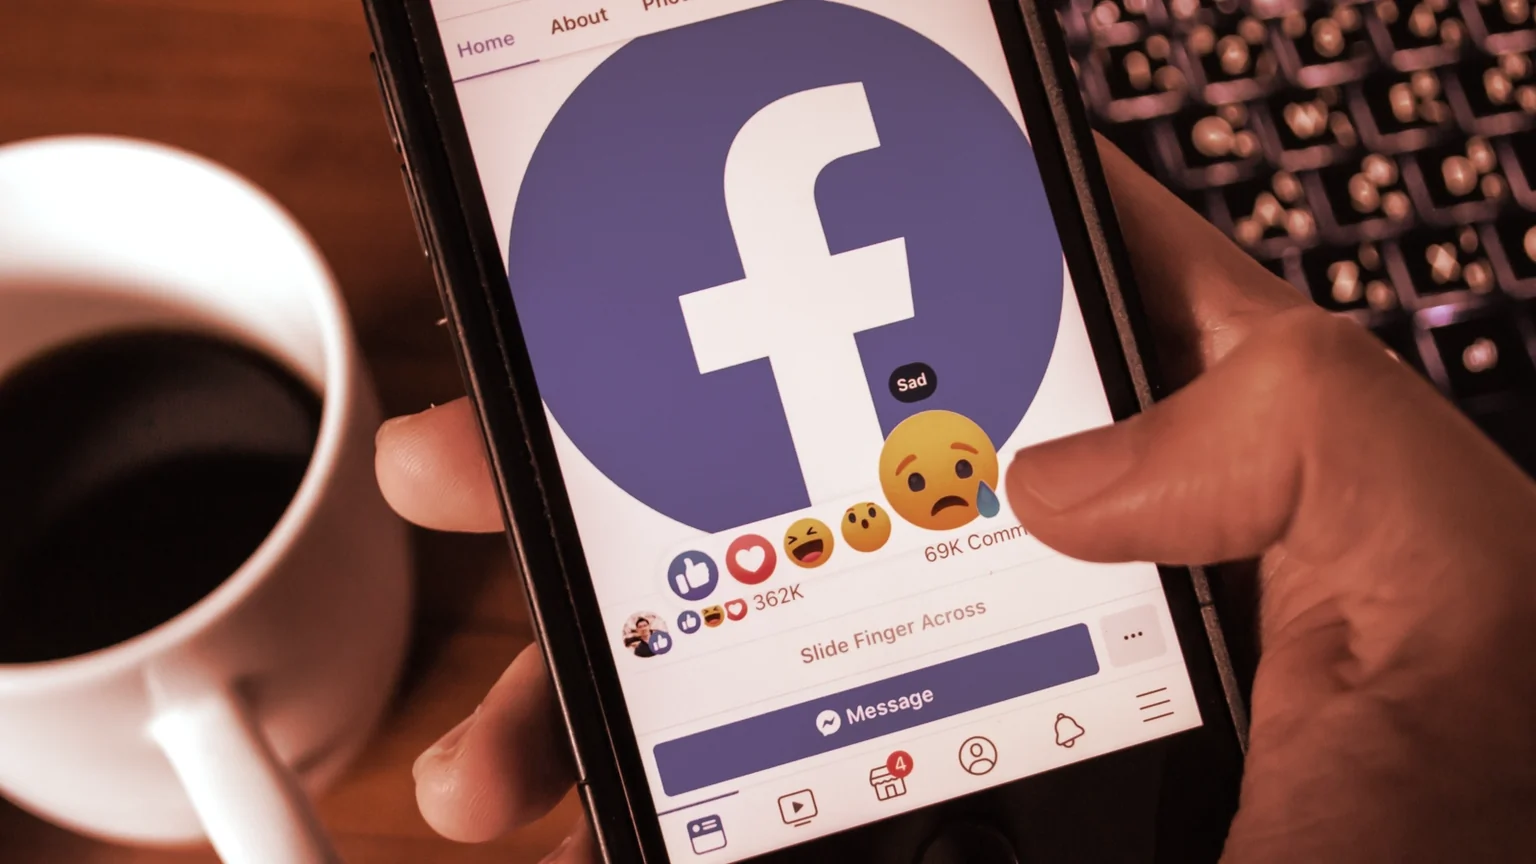 Facebook is down. Bitcoin is... you know the rest. Image: Shutterstock